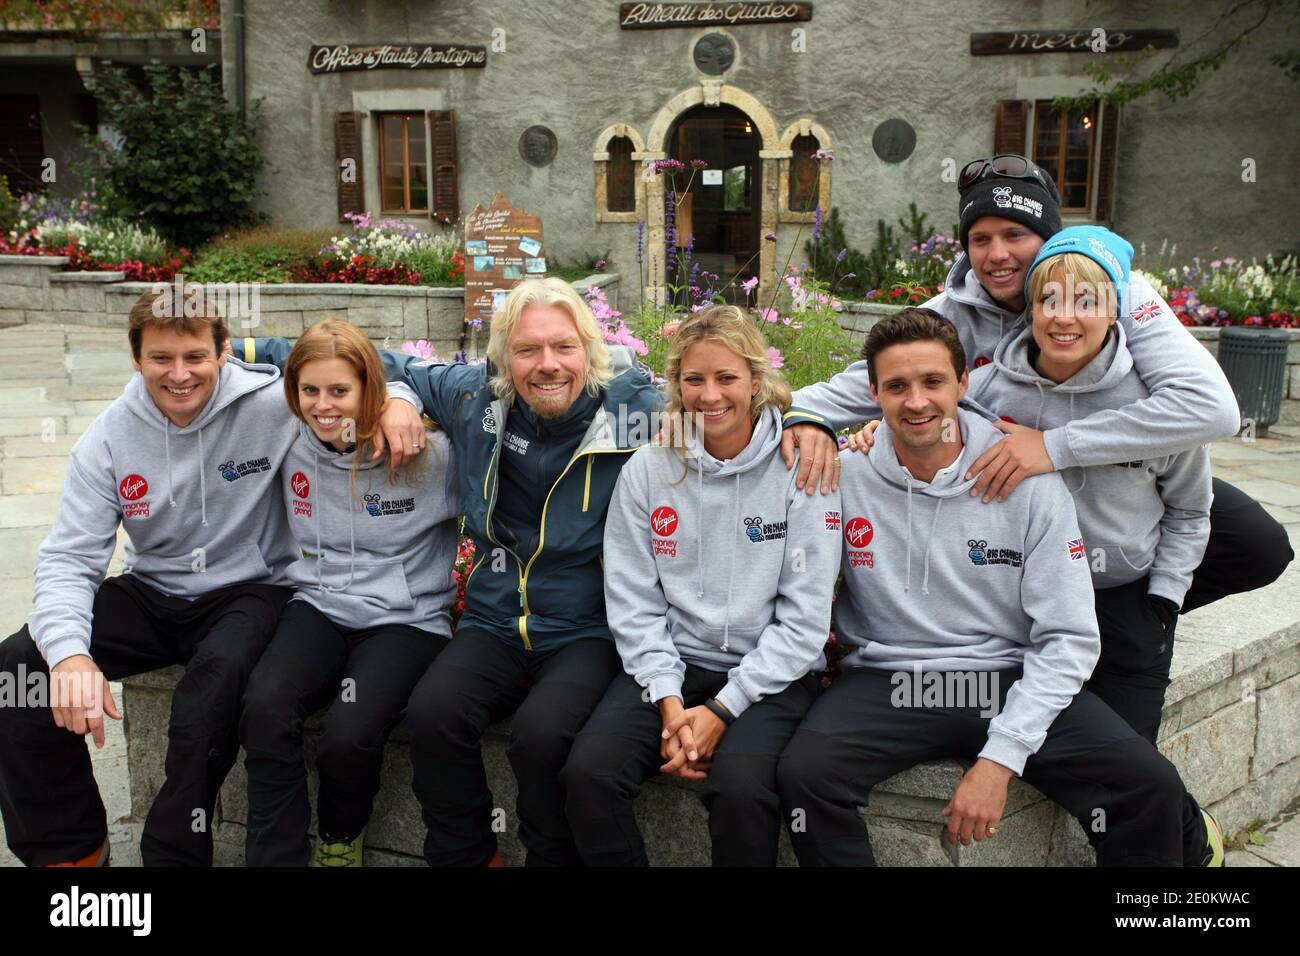 Virgin Group founder and CEO Sir Richard Branson (3rd L) poses alongside the team of The Big Change Charitable Trust, (L-R), Sam Richardson, Princess Beatrice of York, Holly Branson, Phil Nevin, Sam Branson and his fiancee Isabella Calthorpe, in Chamonix, French Alps on September 3, 2012. Sir Richard joined the team in their attempt to climb Western Europe's highest mountain, Mont Blanc. Founded by Branson's children Holly and Sam along with their friends, the Trust works in partnership with charitable projects throughout the UK, assisting them in their mission to inspire and encourage young p Stock Photo